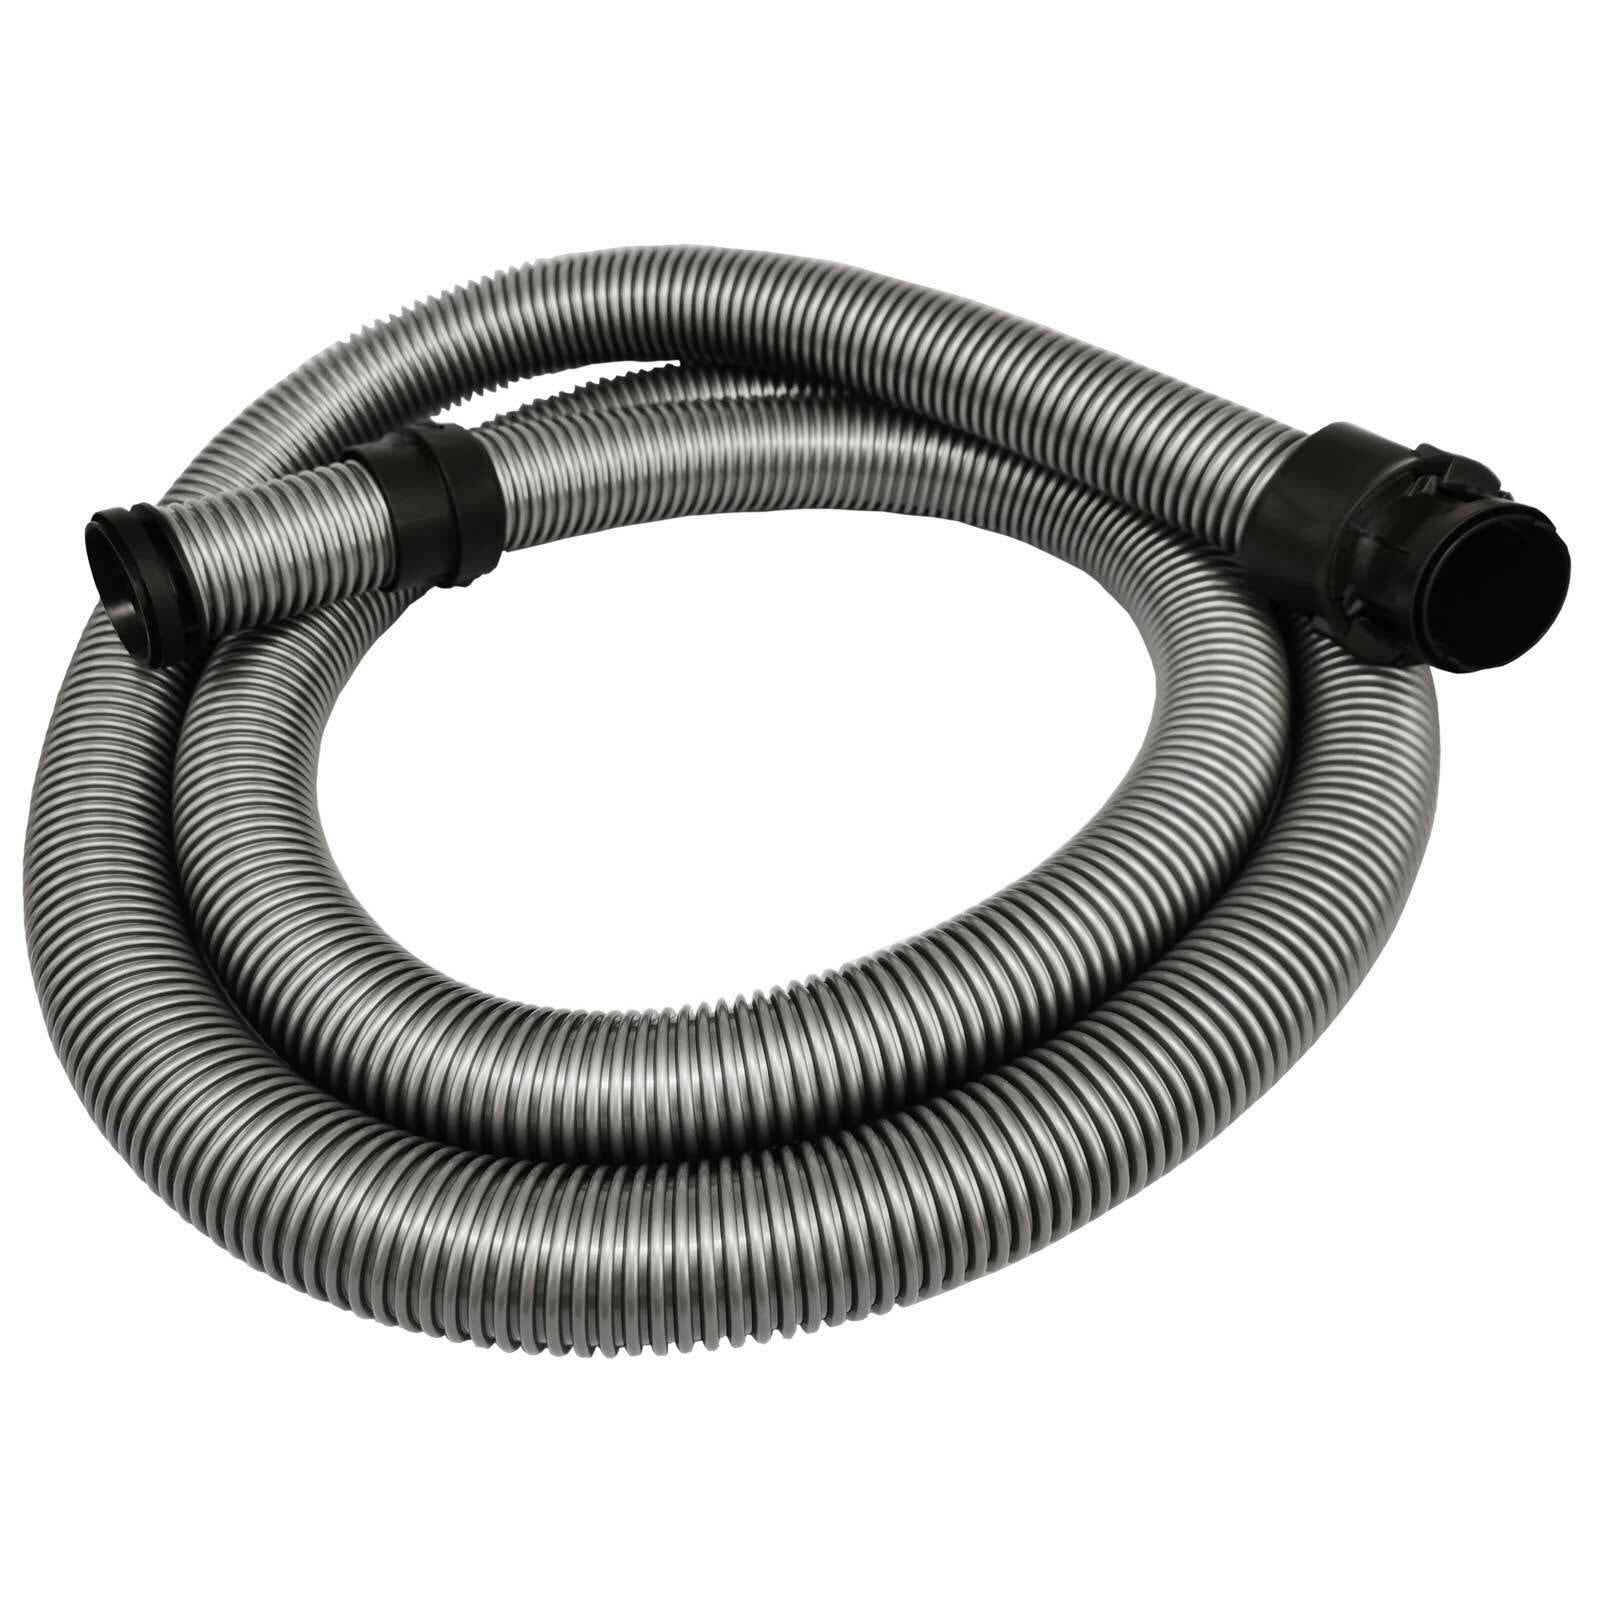 Flexible Suction Hose 2.5M For Miele S8310 S8330 S8340 S8390 S8320 S8 Sparesbarn